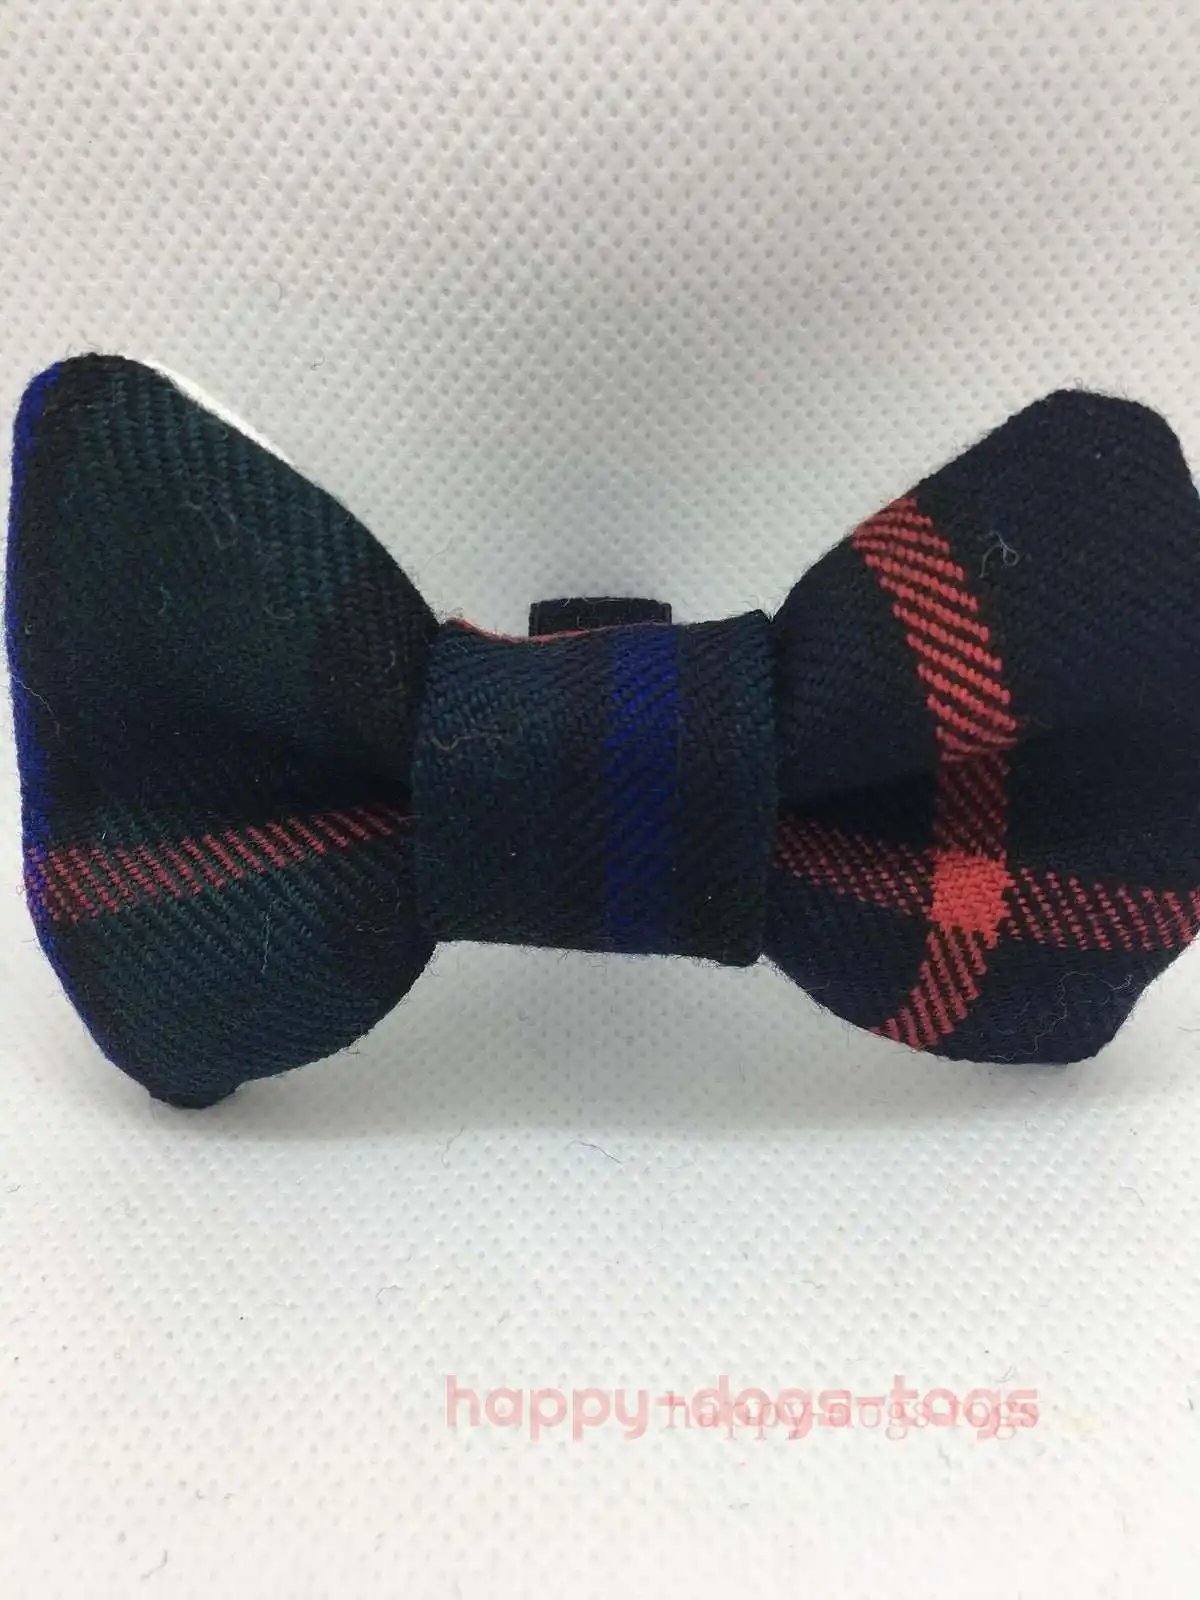 Small Tartan dog bow tie in Green, Black and Red